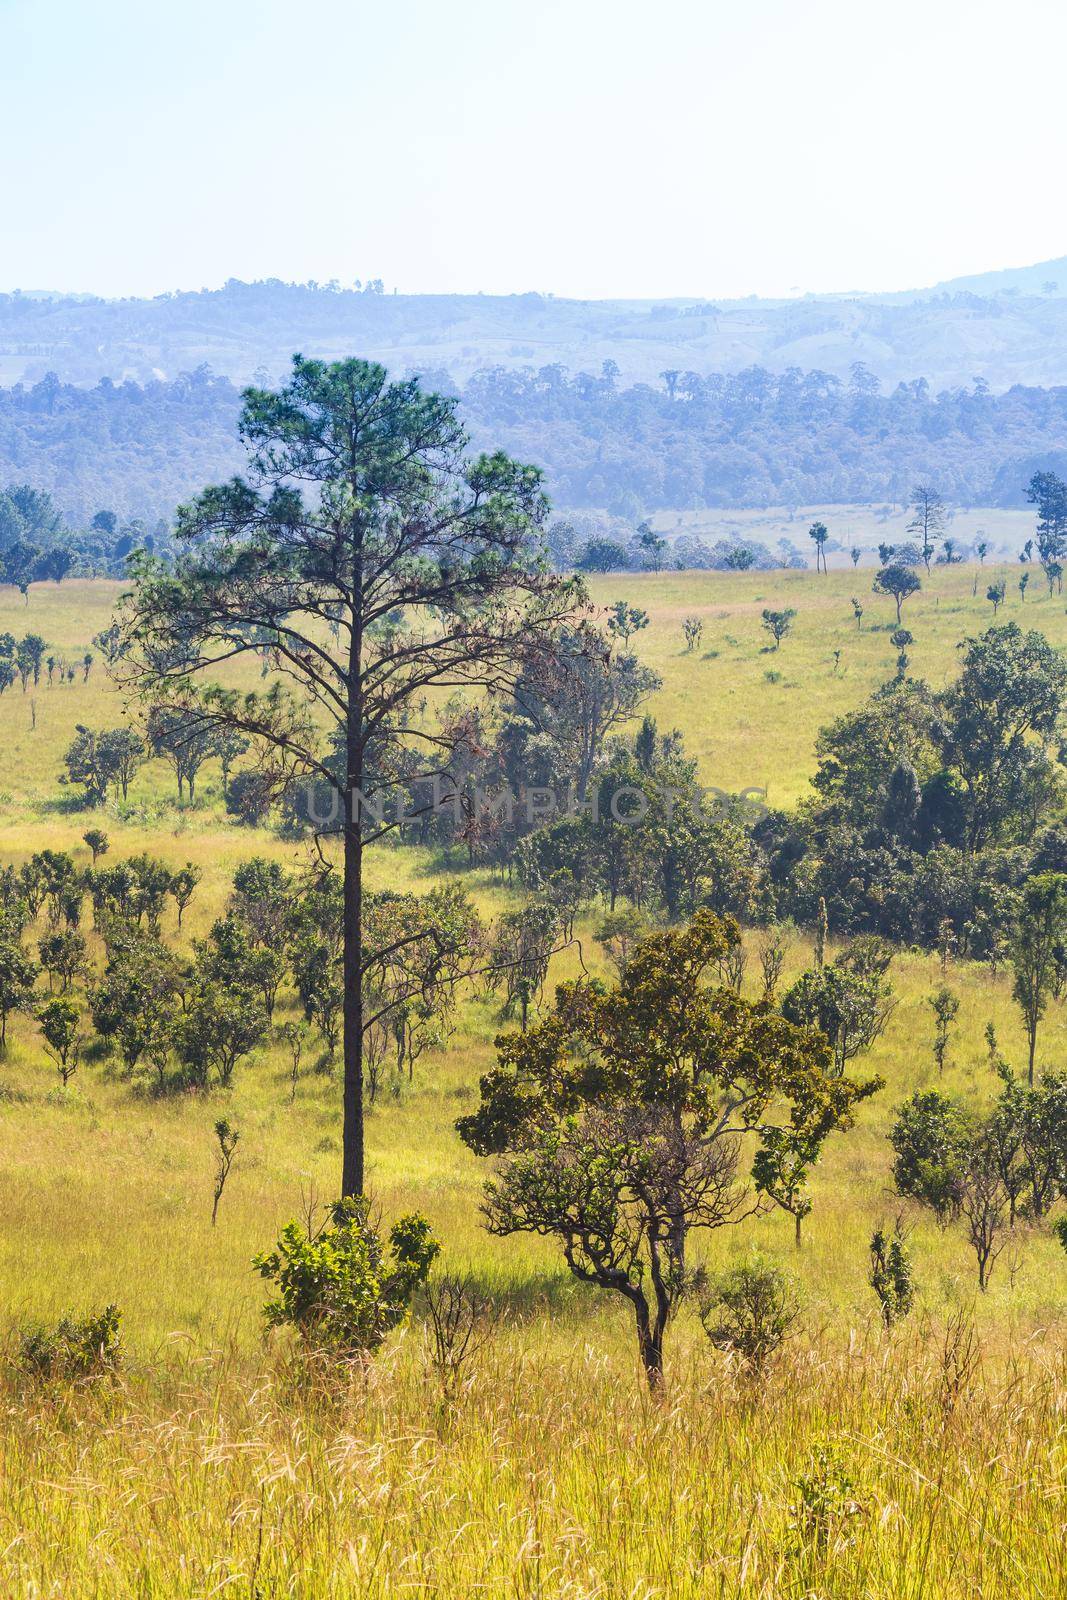 Thung salaeng Luang National Park . Savannah field and pine tree . Phetchabun and Phitsanulok province . Northern of Thailand . Telephoto view . by stockdevil